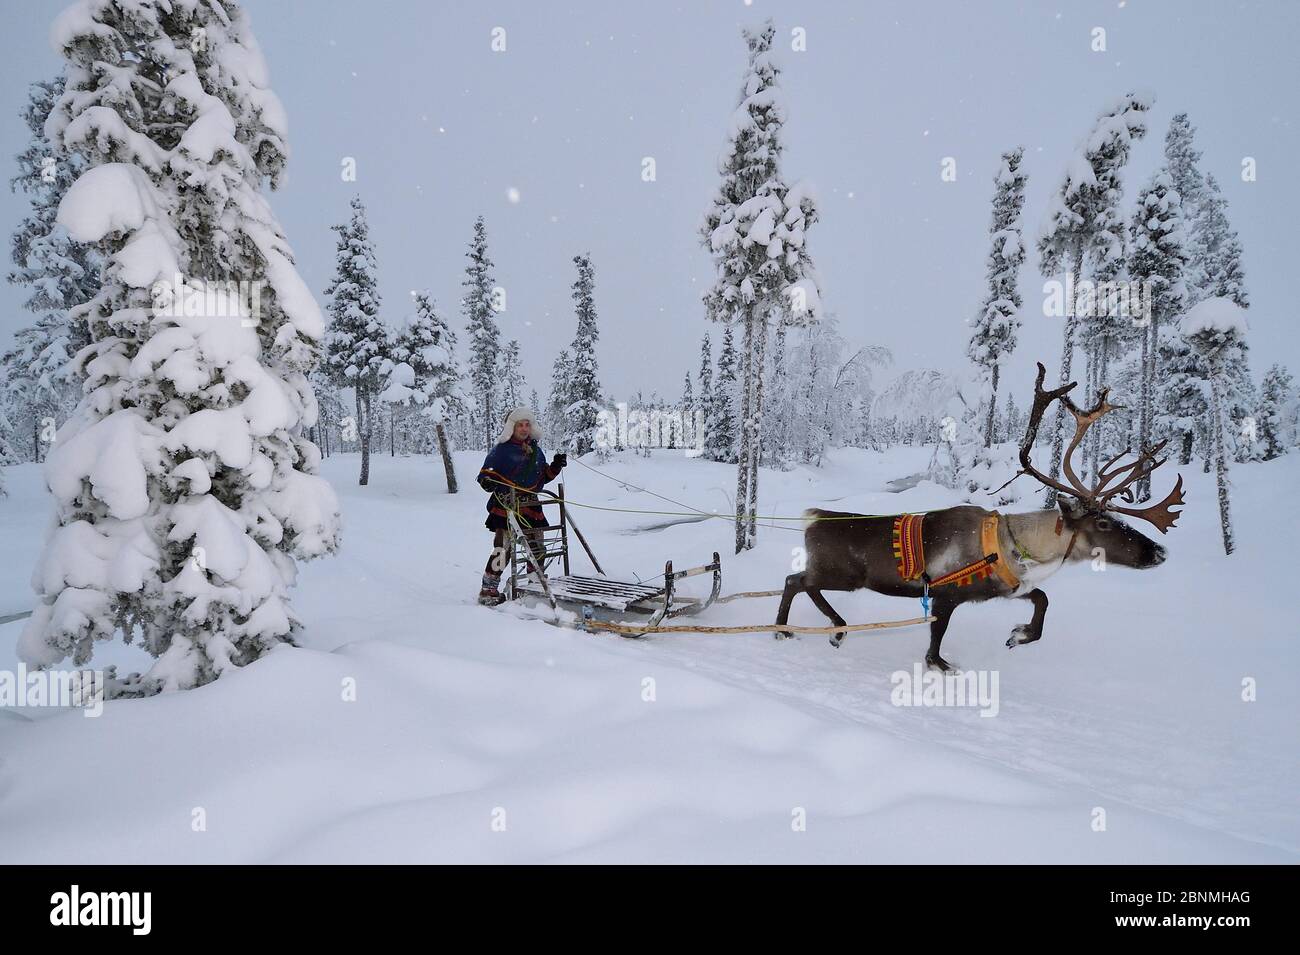 Reindeer sledding in - 25 C, with Nils-Torbjorn Nutti, owner and operator of Nutti Sami Siida, Jukkasjarvi, Lapland, Laponia, Norrbotten county, Swede Stock Photo